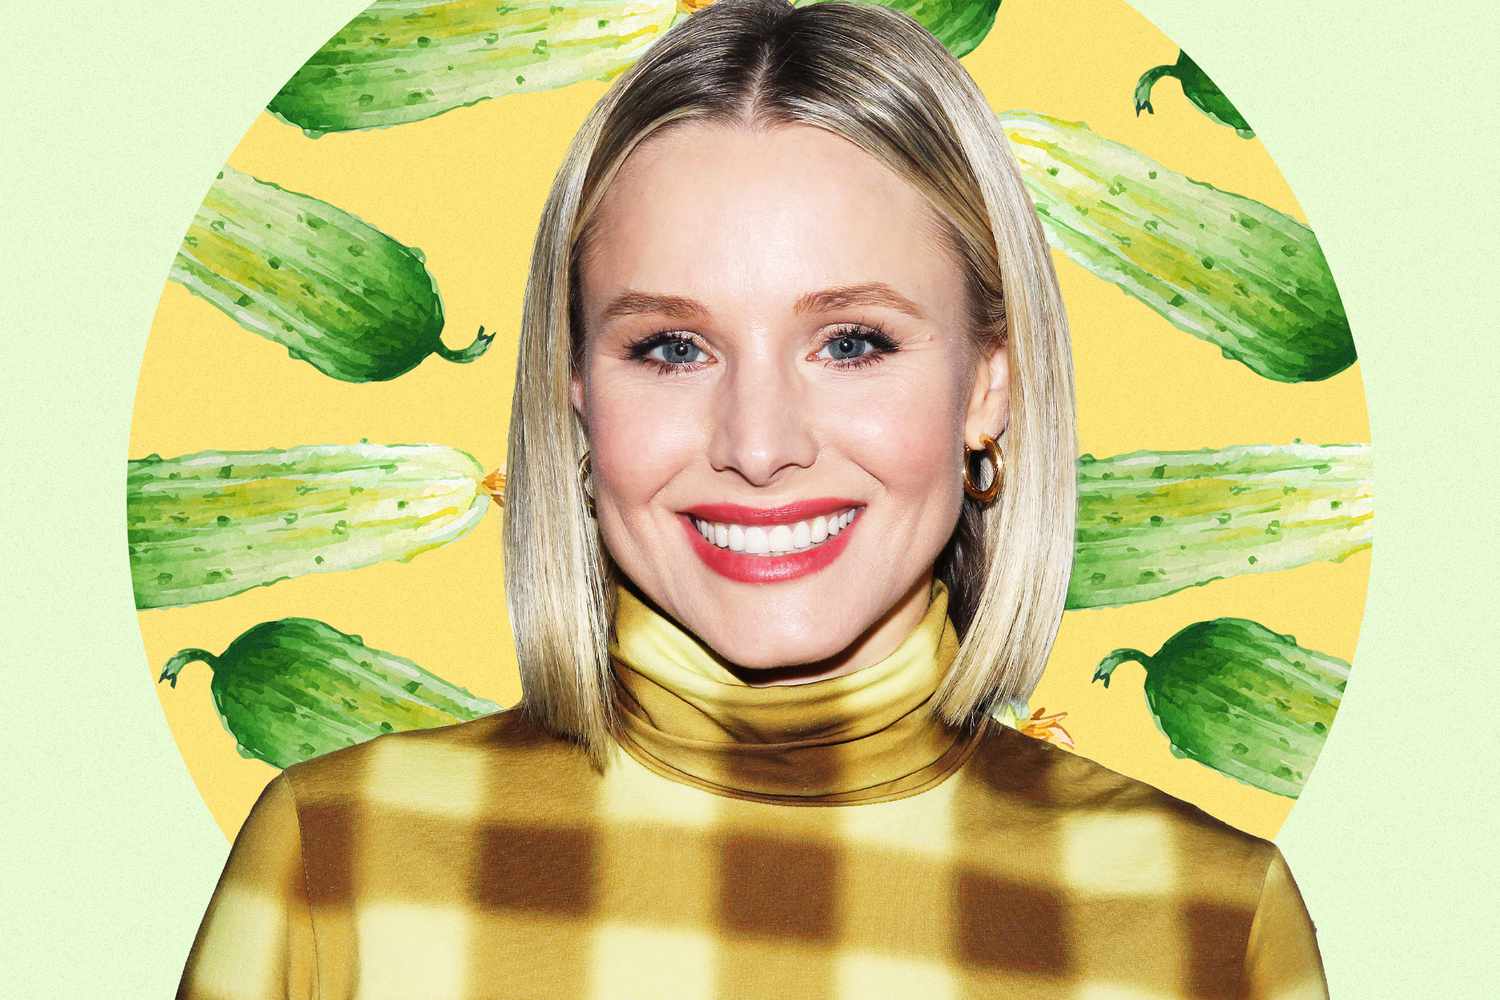 Kristen Bell on a background of pickles